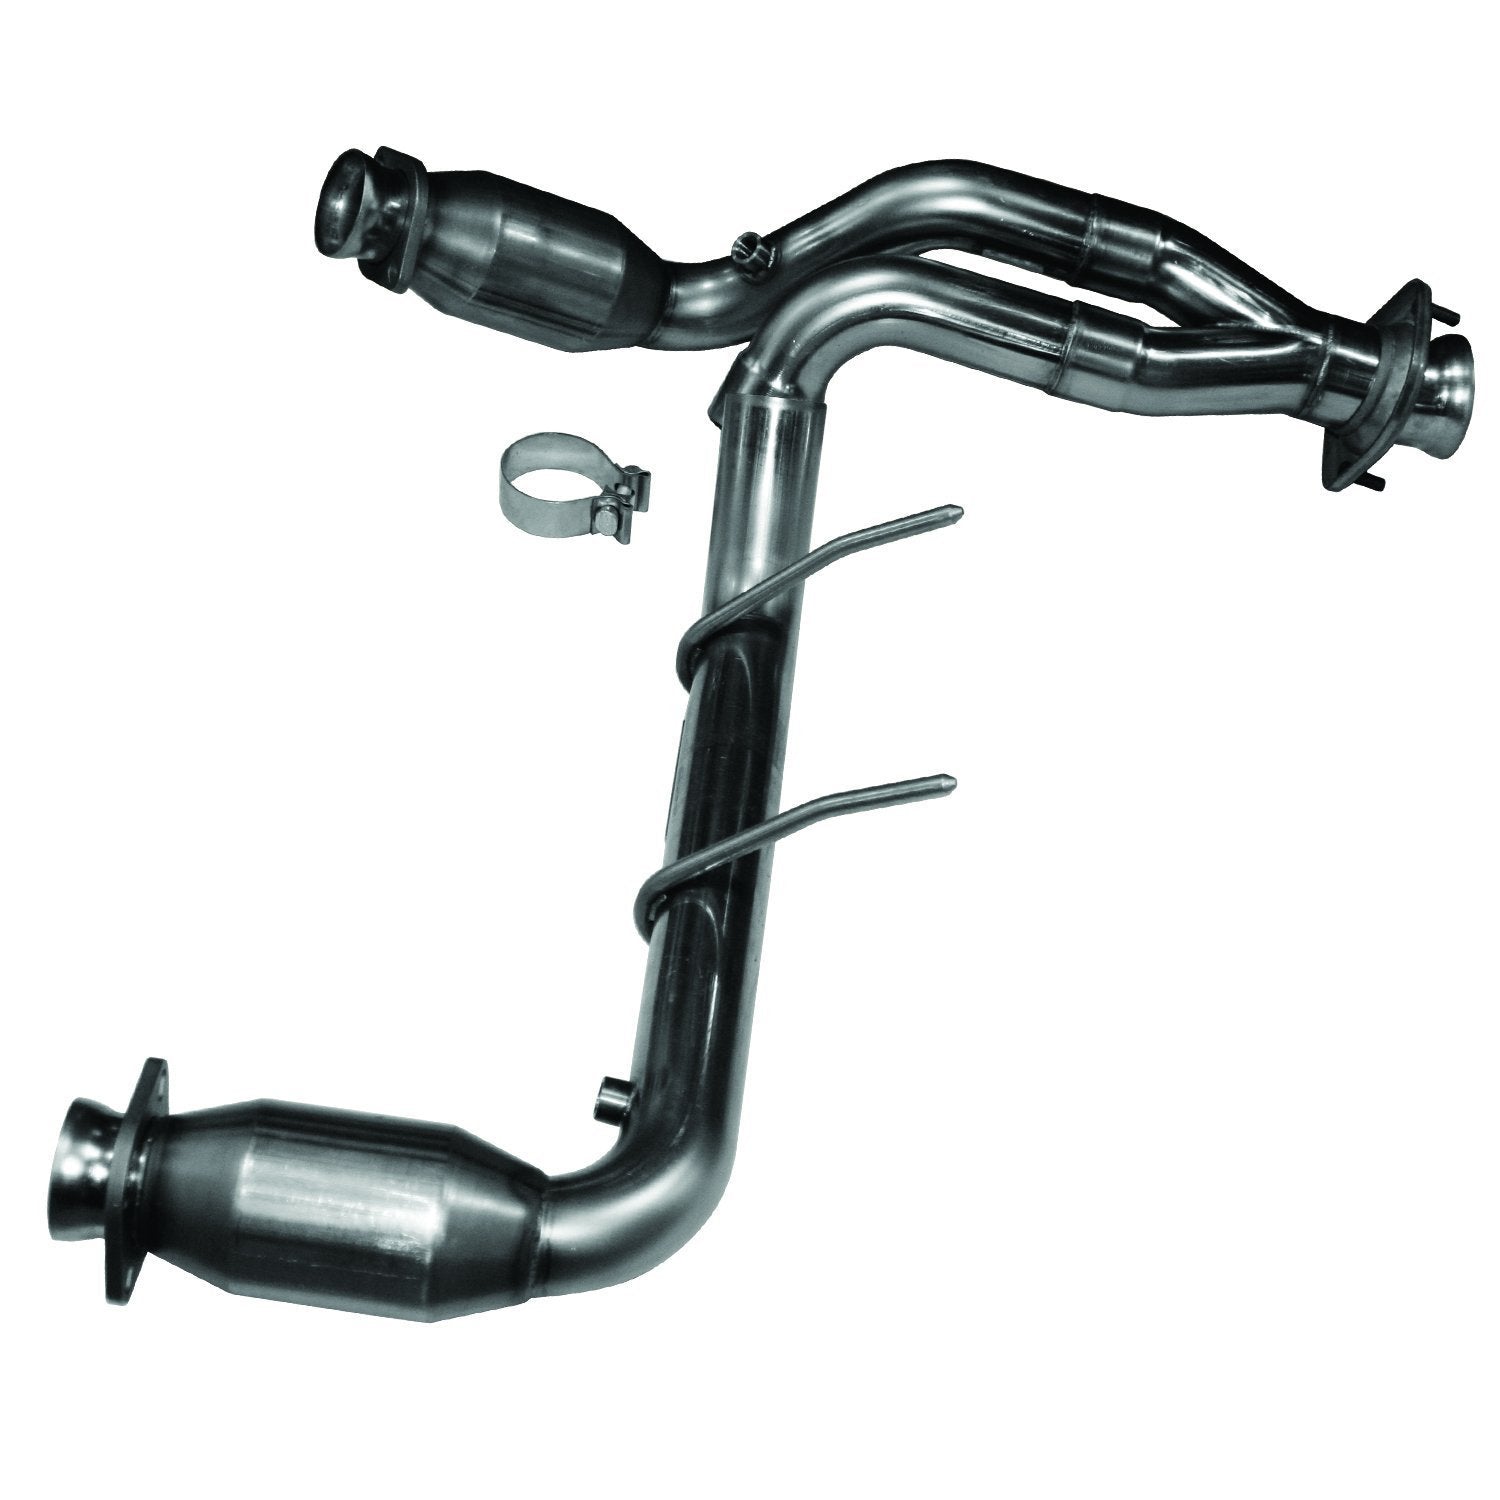 2010 Ford Raptor SVT 2 1/2" Green Catted Y Pipe 5.4L Performance Kooks Headers parts